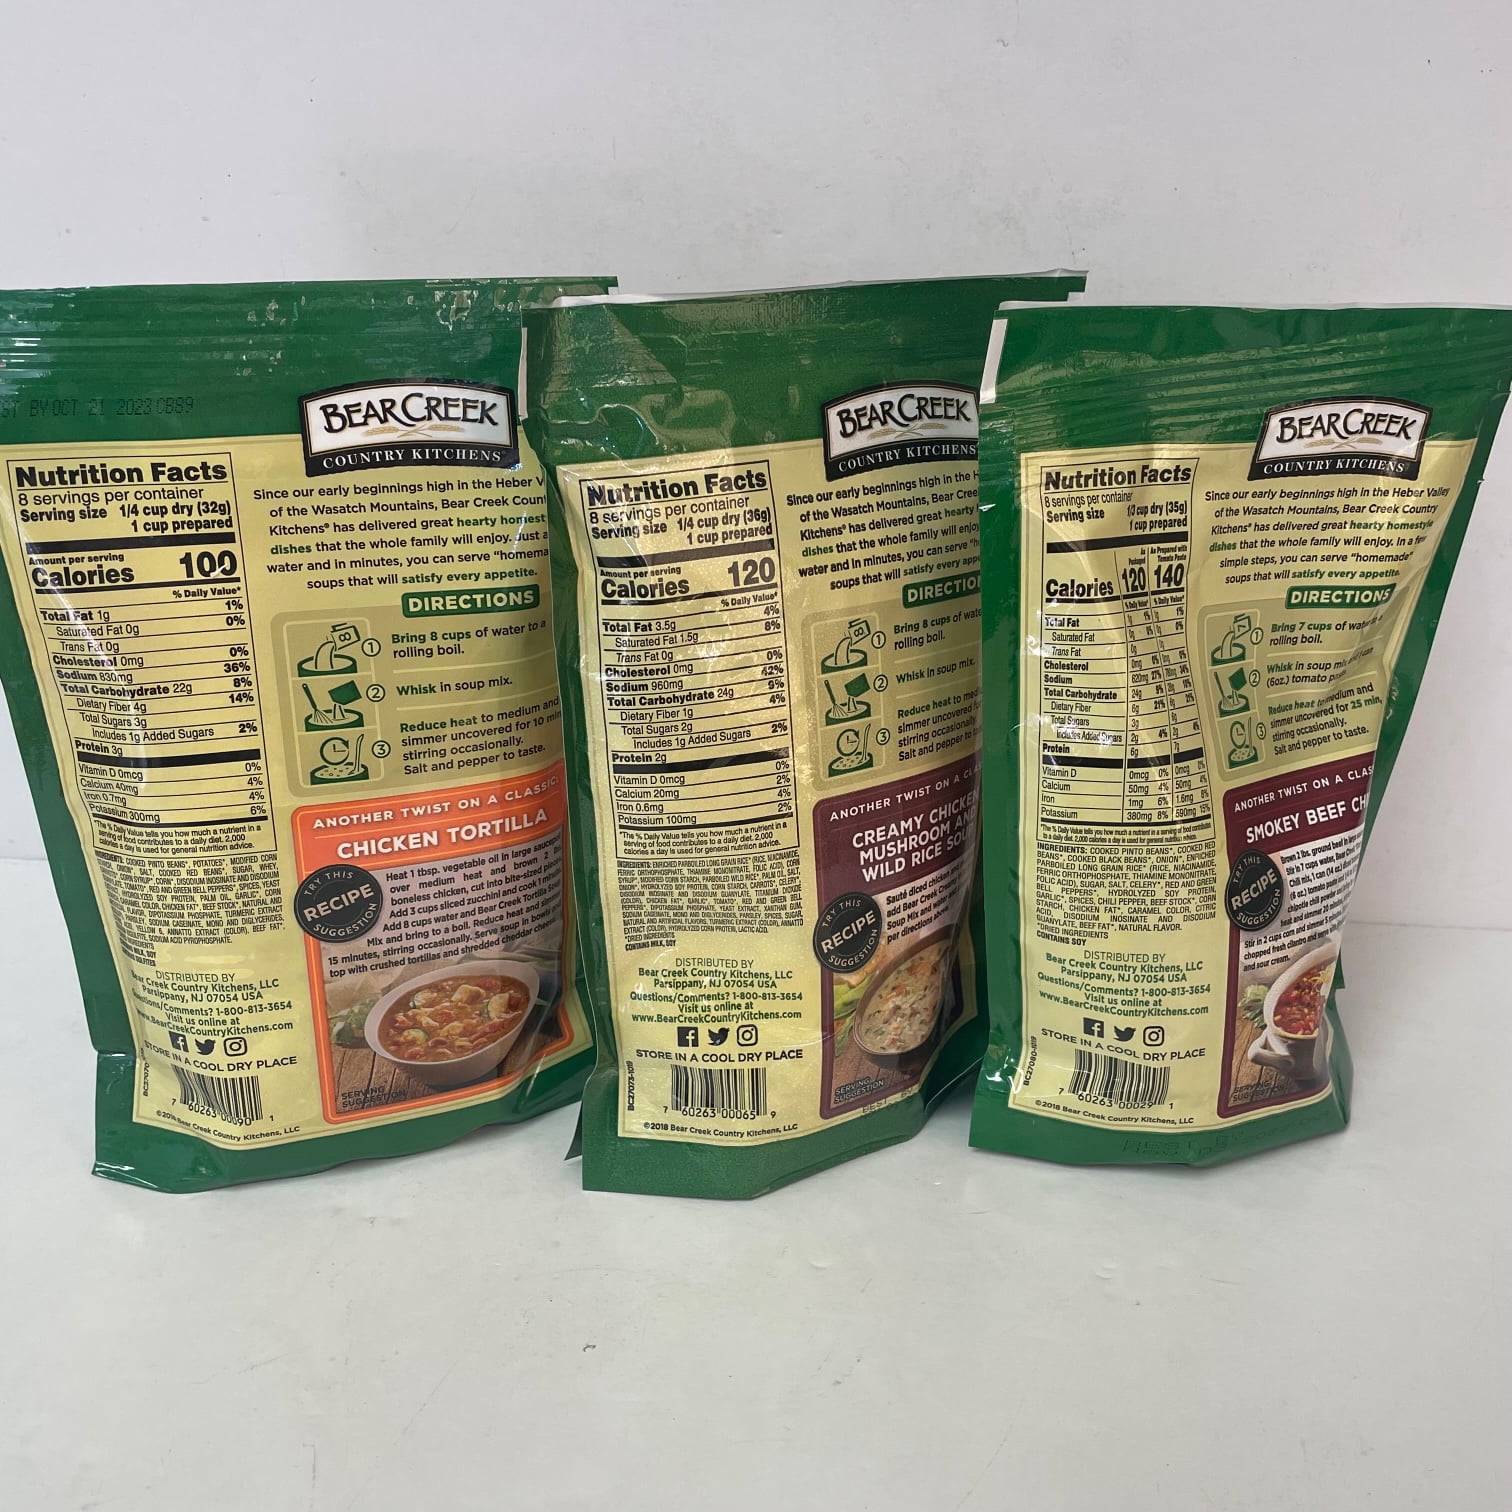 Bear Creek Dry Soup Mix Variety 3 Pack - Chicken Noodle, Darn Good Chili & Cheddar Potato